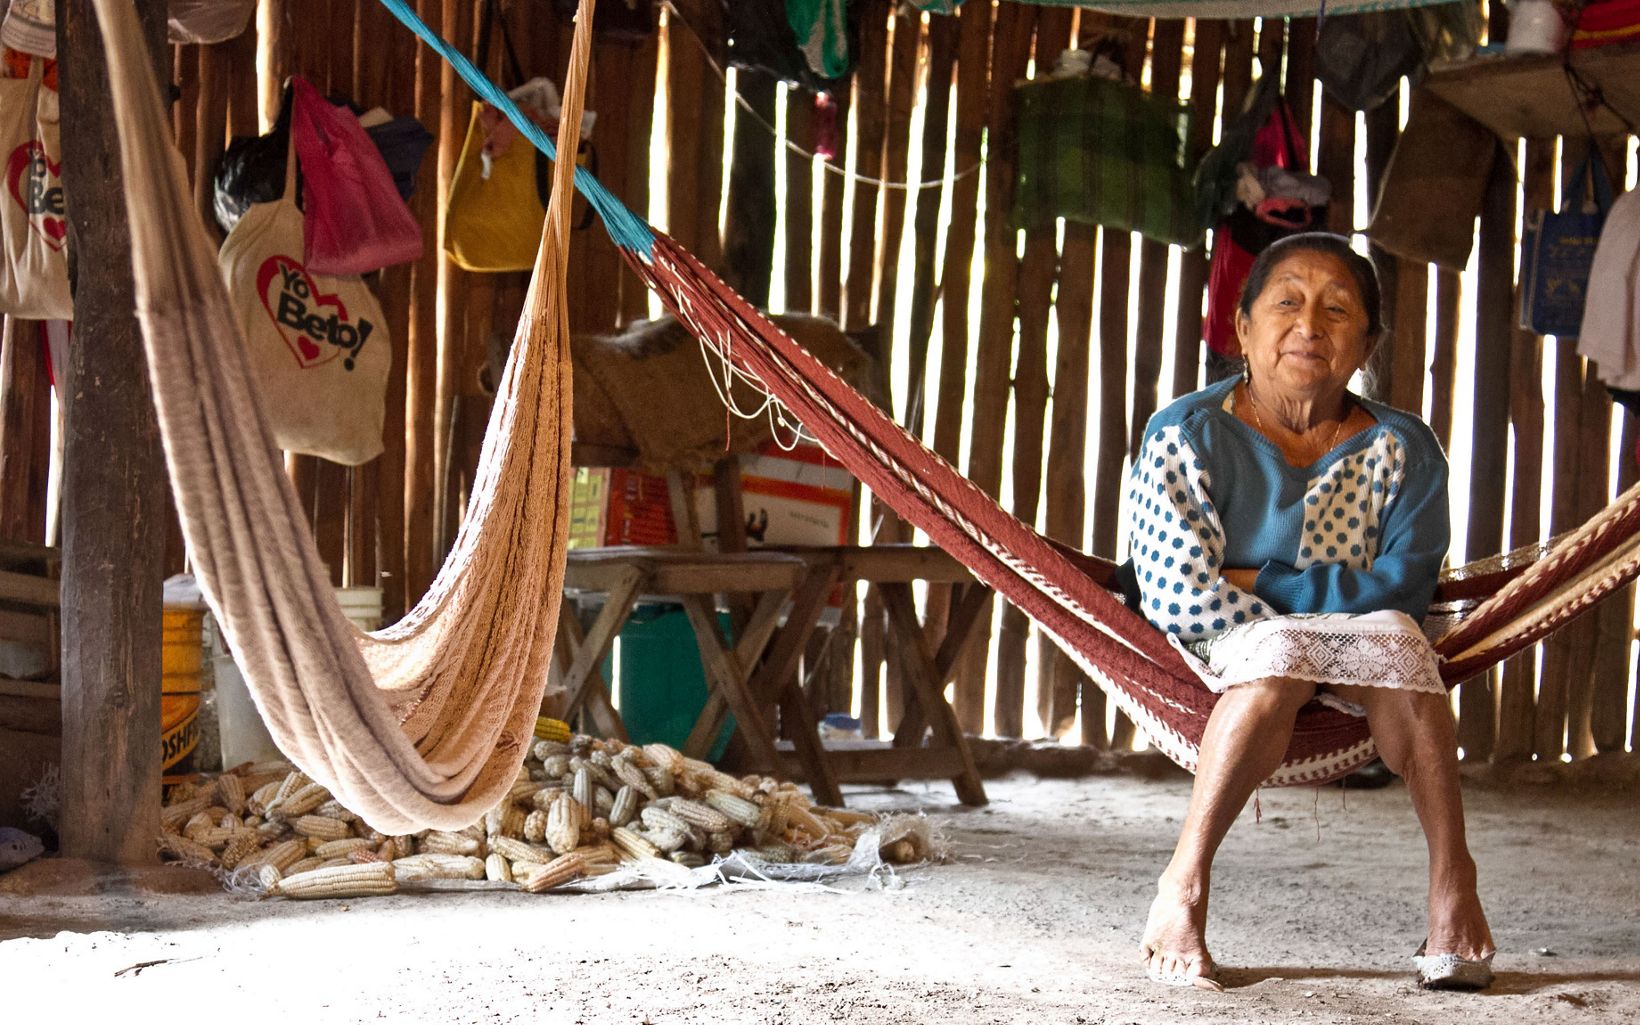 
                
                  A woman relaxes in a hammock Quitana Roo, Mexico. TNC has worked with partner organizations in the Maya Forest to support sustainable forest management and income-producing activities.
                  © Erika Nortemann/TNC
                
              